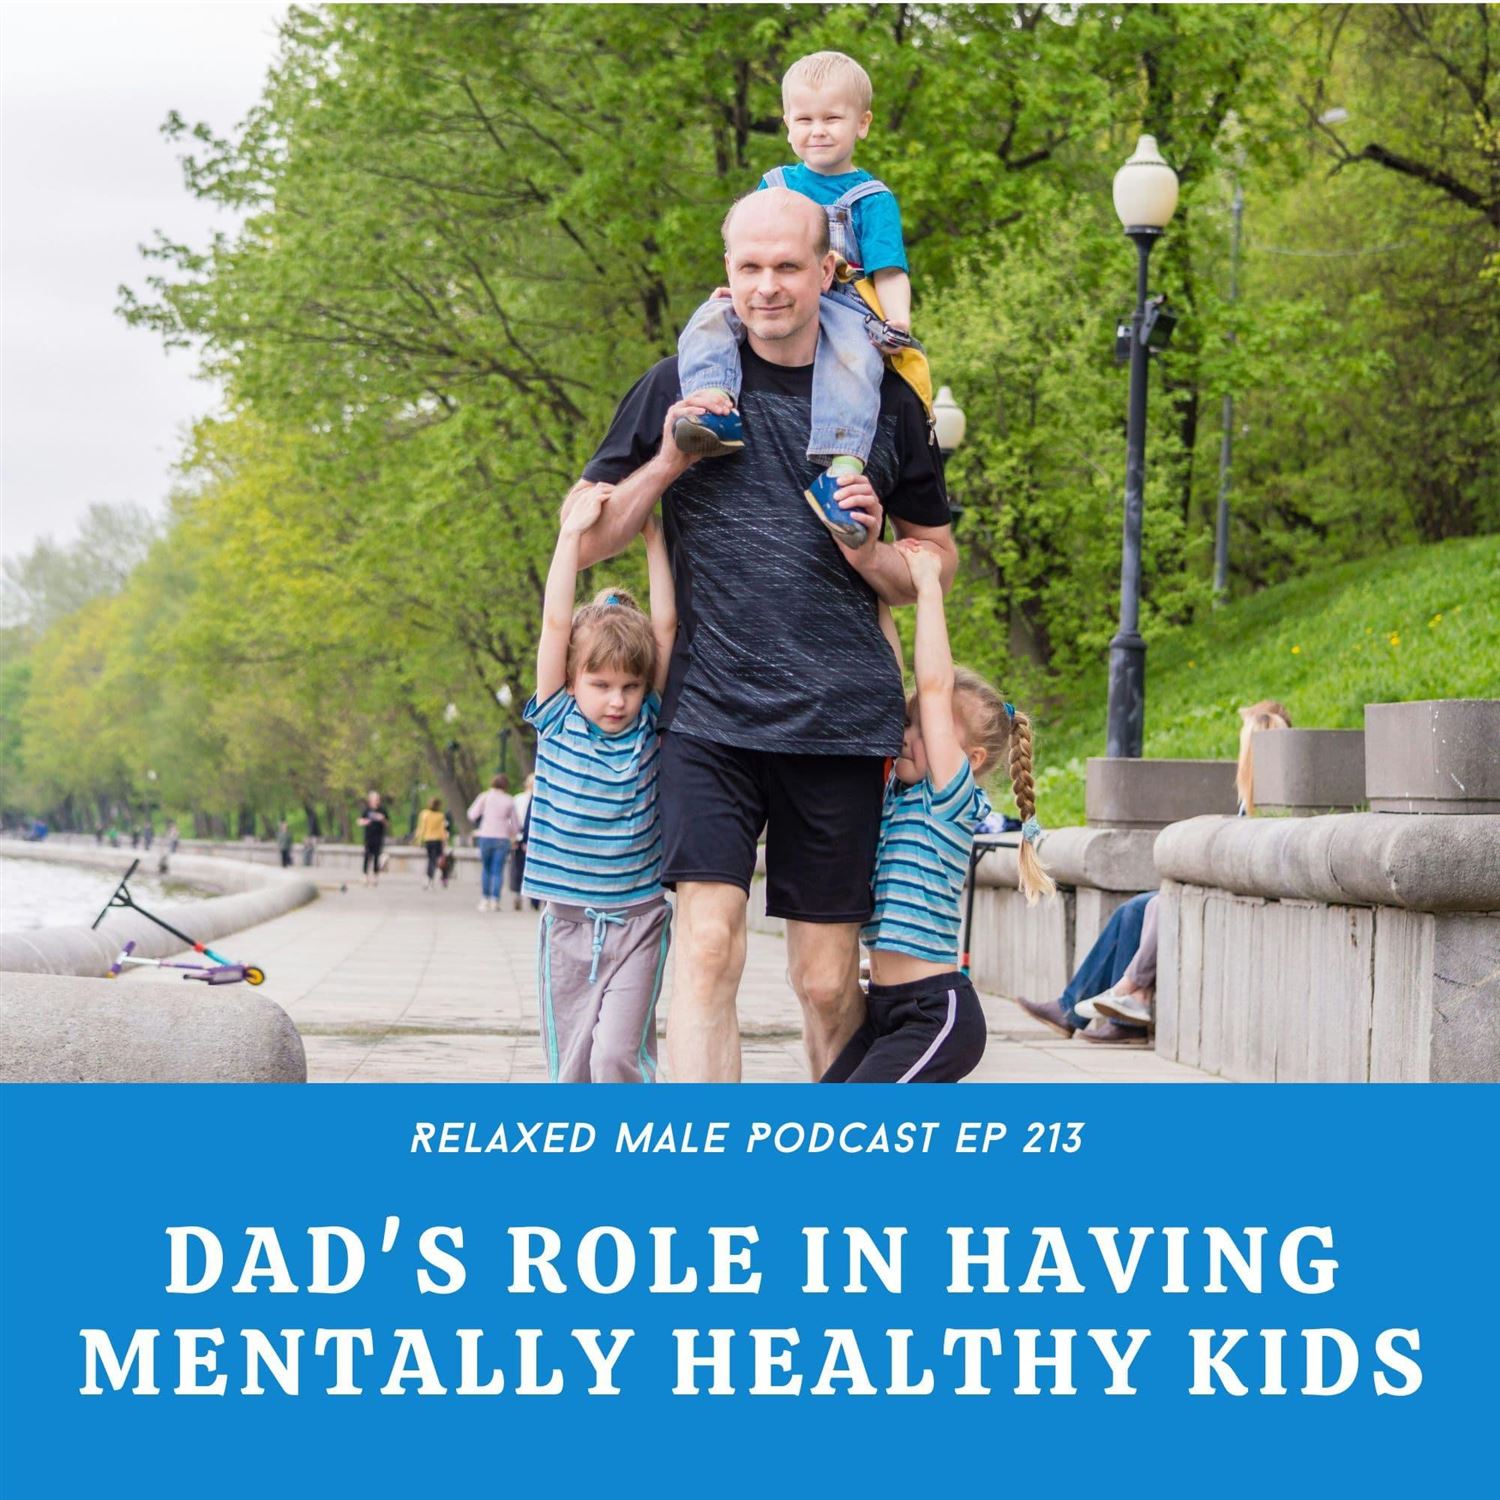 Dad's Role in Having Mentally Healthy Kids